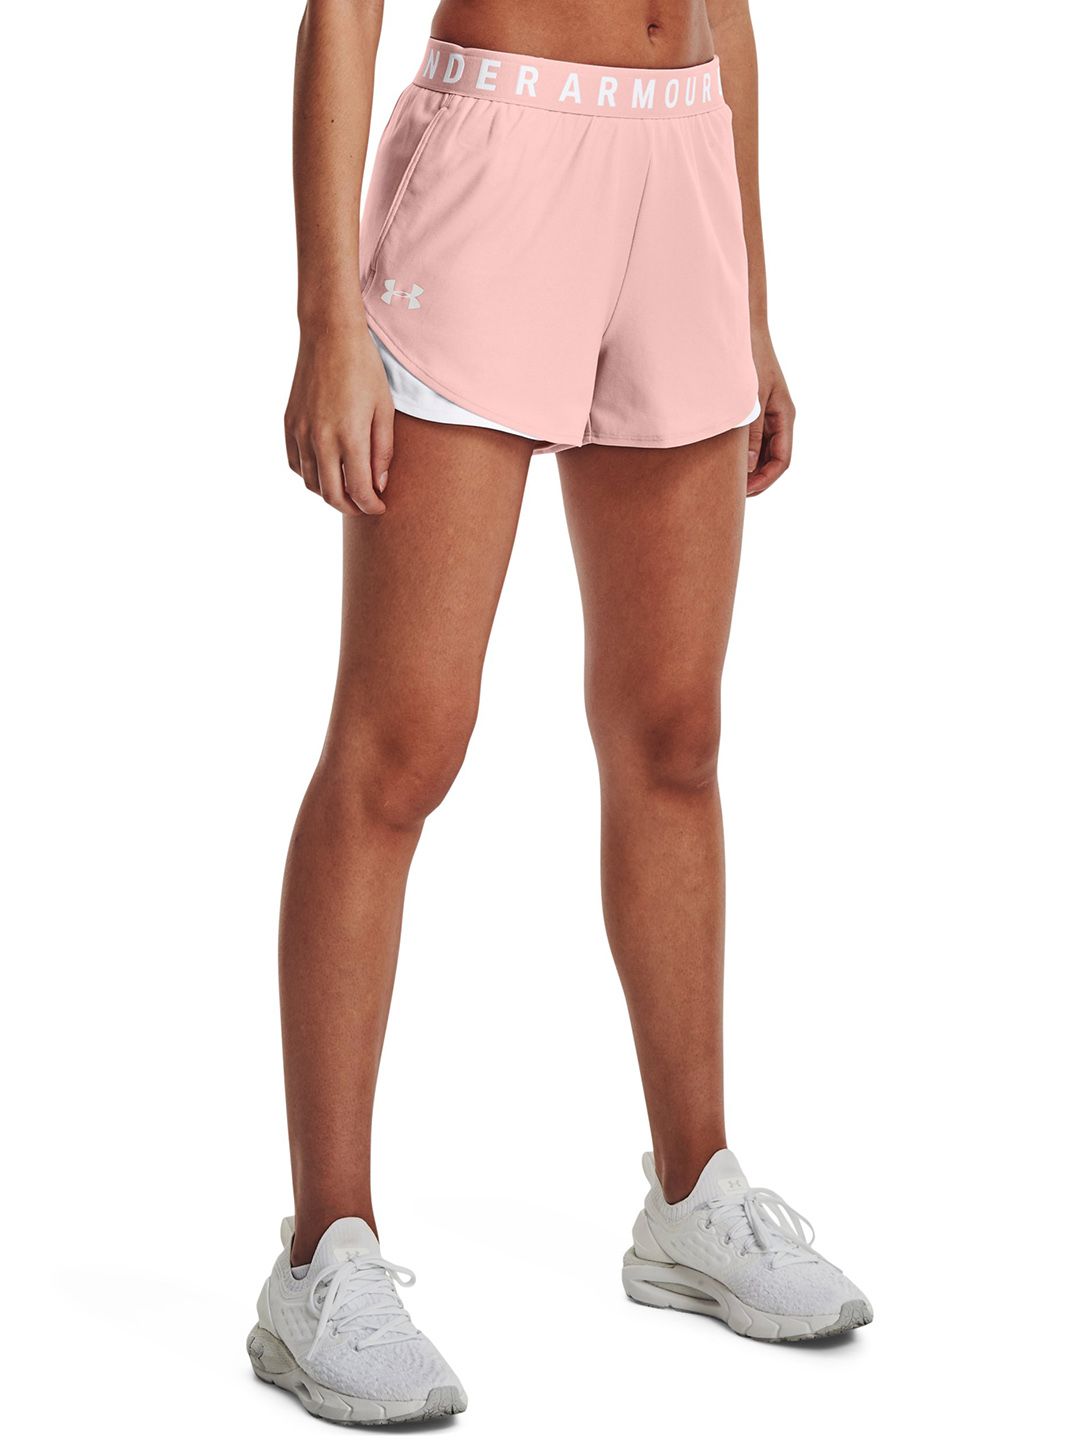 UNDER ARMOUR Women Pink Loose Fit Training Play Up Shorts 3.0 Price in India